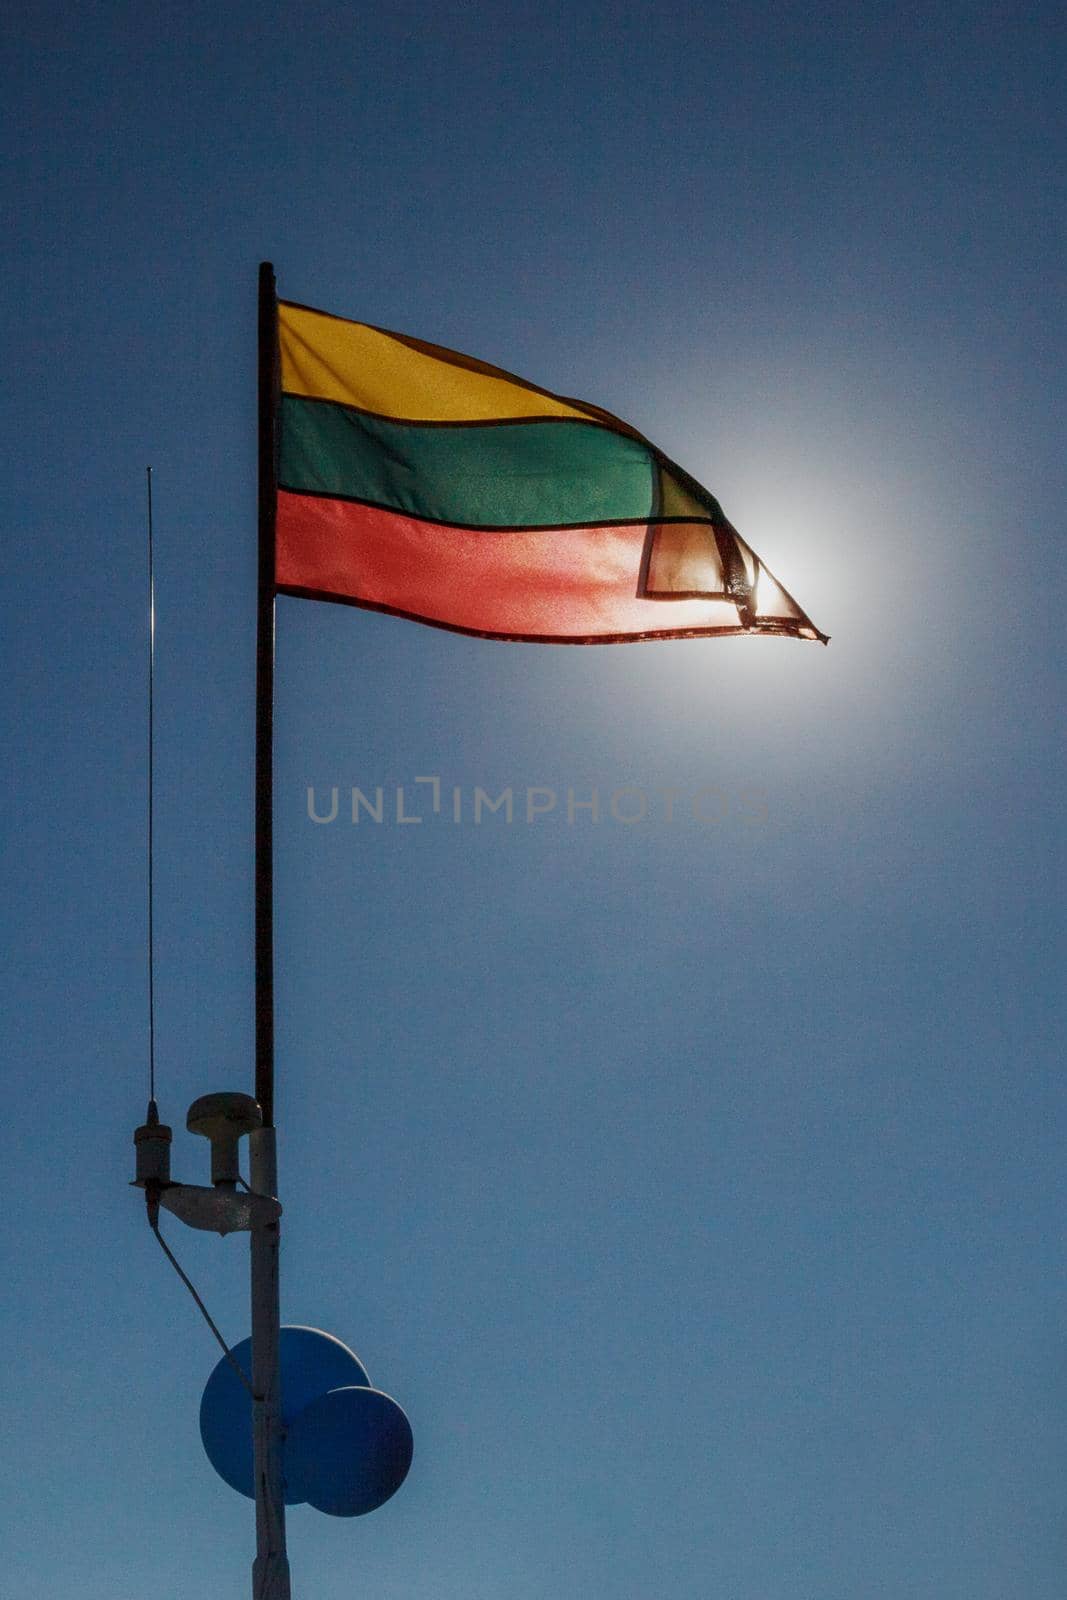 The Lithuanian flag is raised on the ship's mast, it is lit by the sun against a background of blue sky. Vertical photo